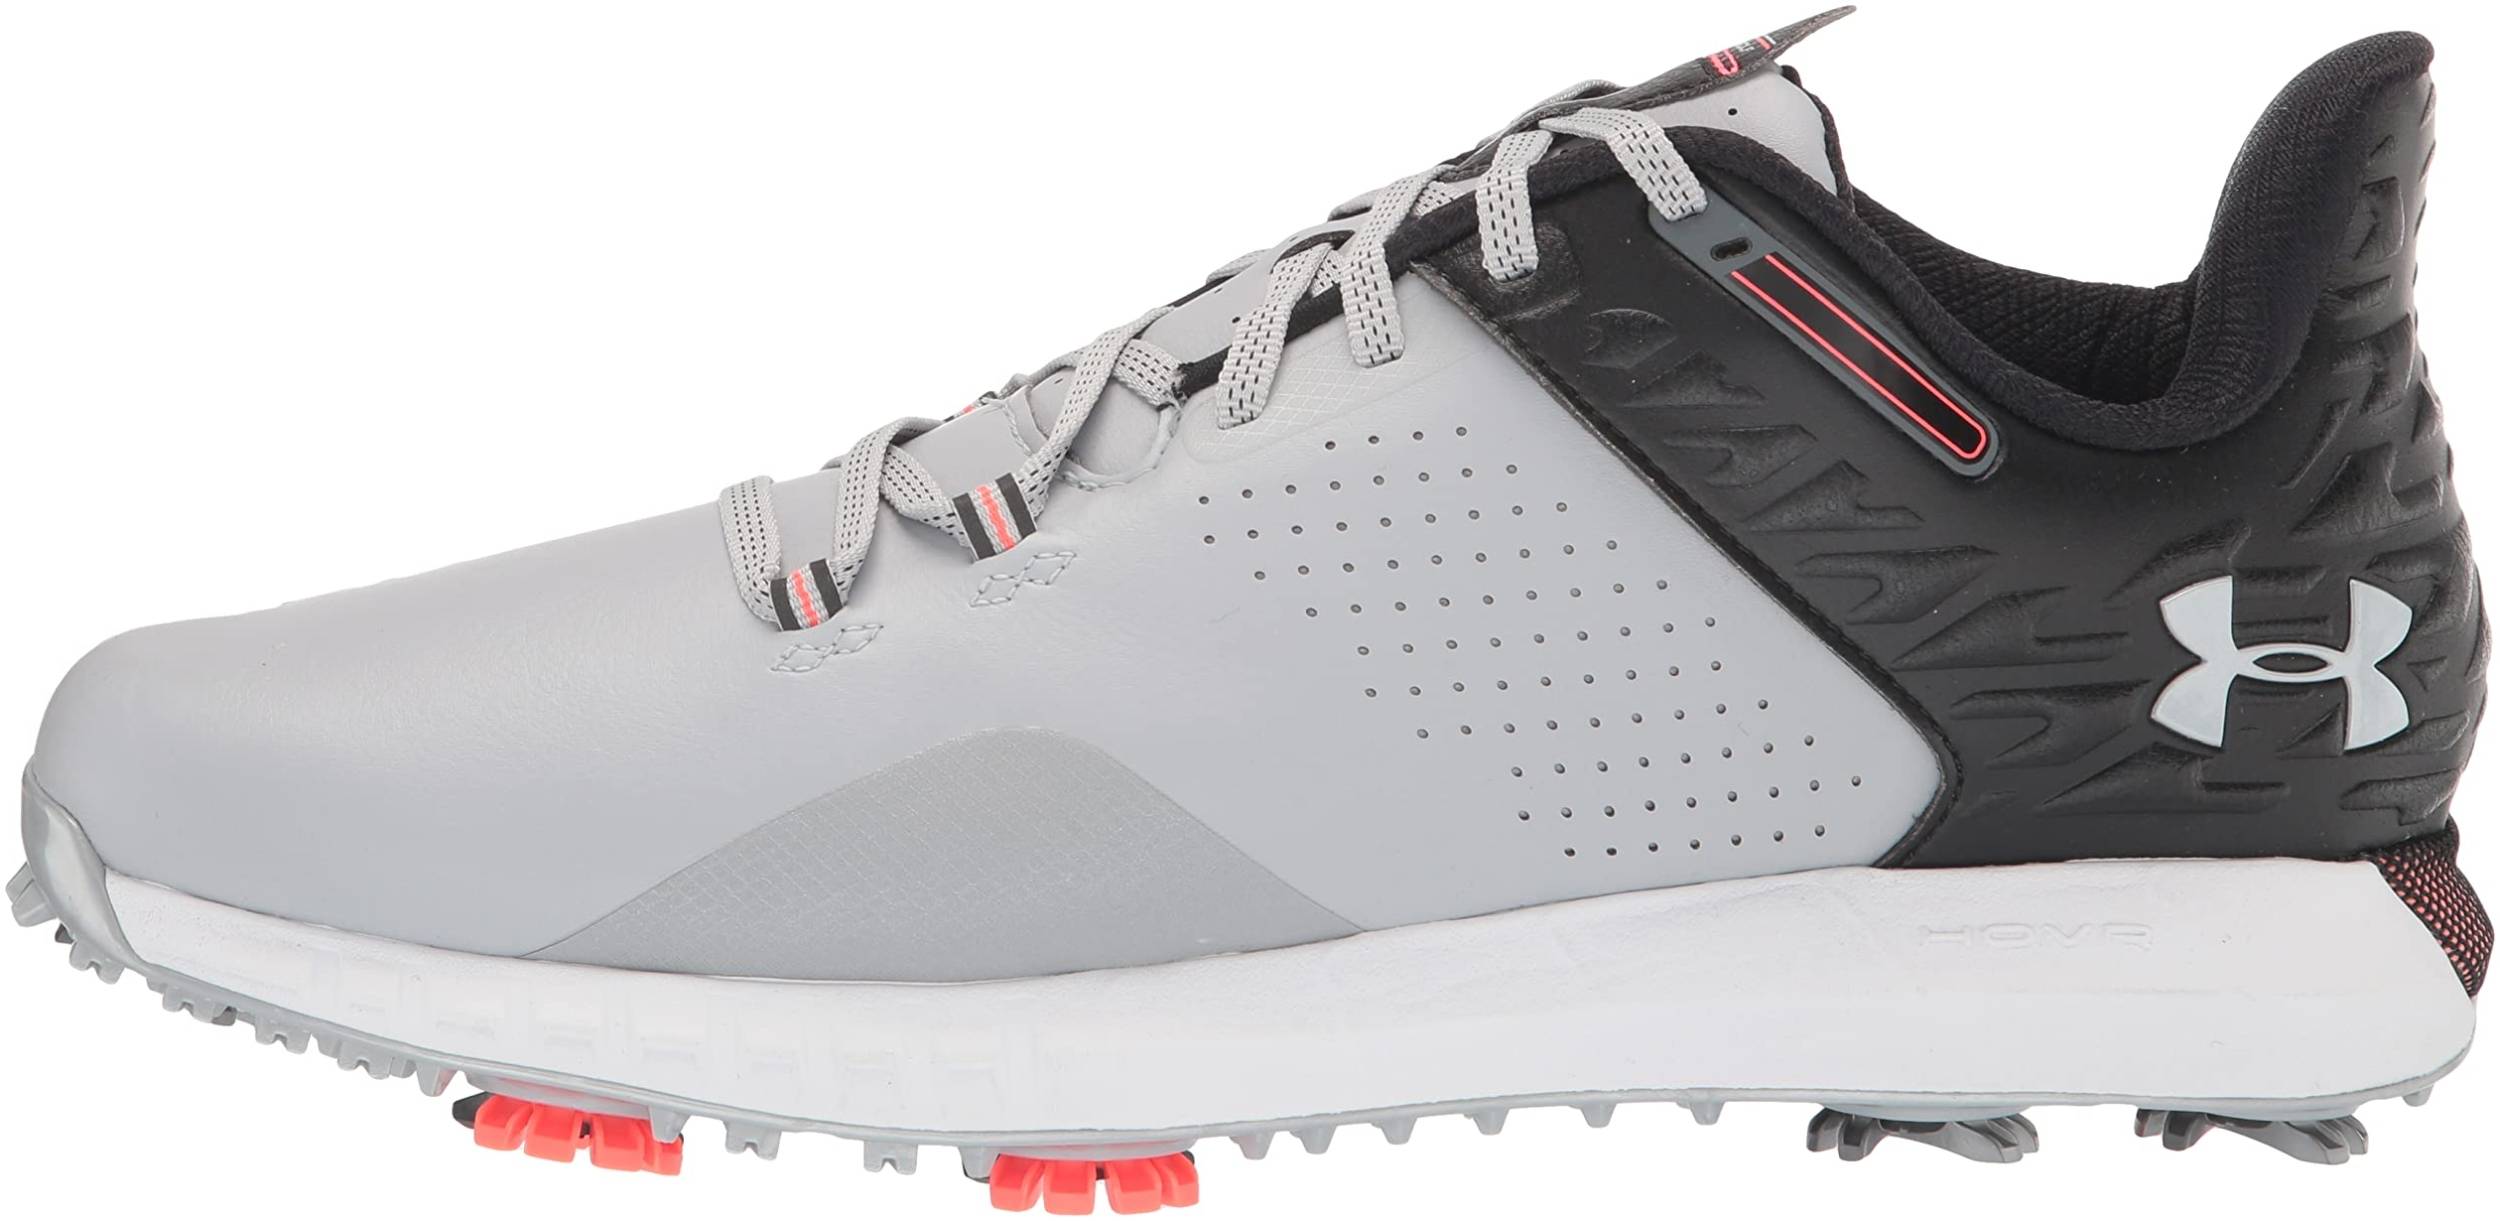 Er is behoefte aan Handel donker 5 Under Armour golf shoes: Save up to 51% | RunRepeat